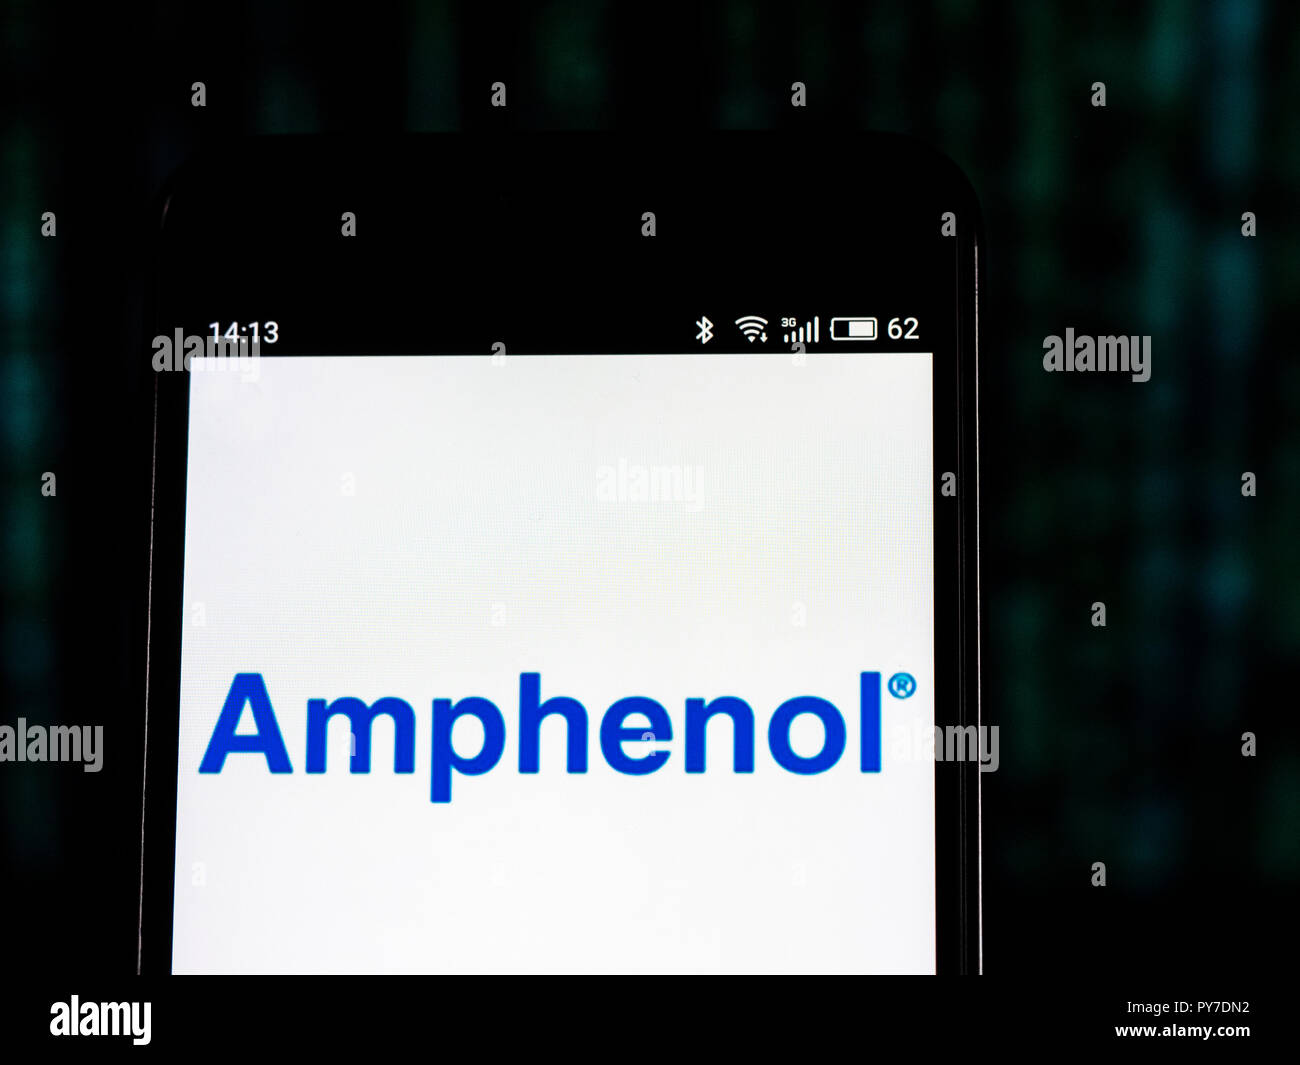 Amphenol Fiber optic cable manufacturing company logo seen displayed on smart phone. Amphenol Corporation is a major producer of electronic and fiber optic connectors, cable and interconnect systems such as coaxial cables. Stock Photo